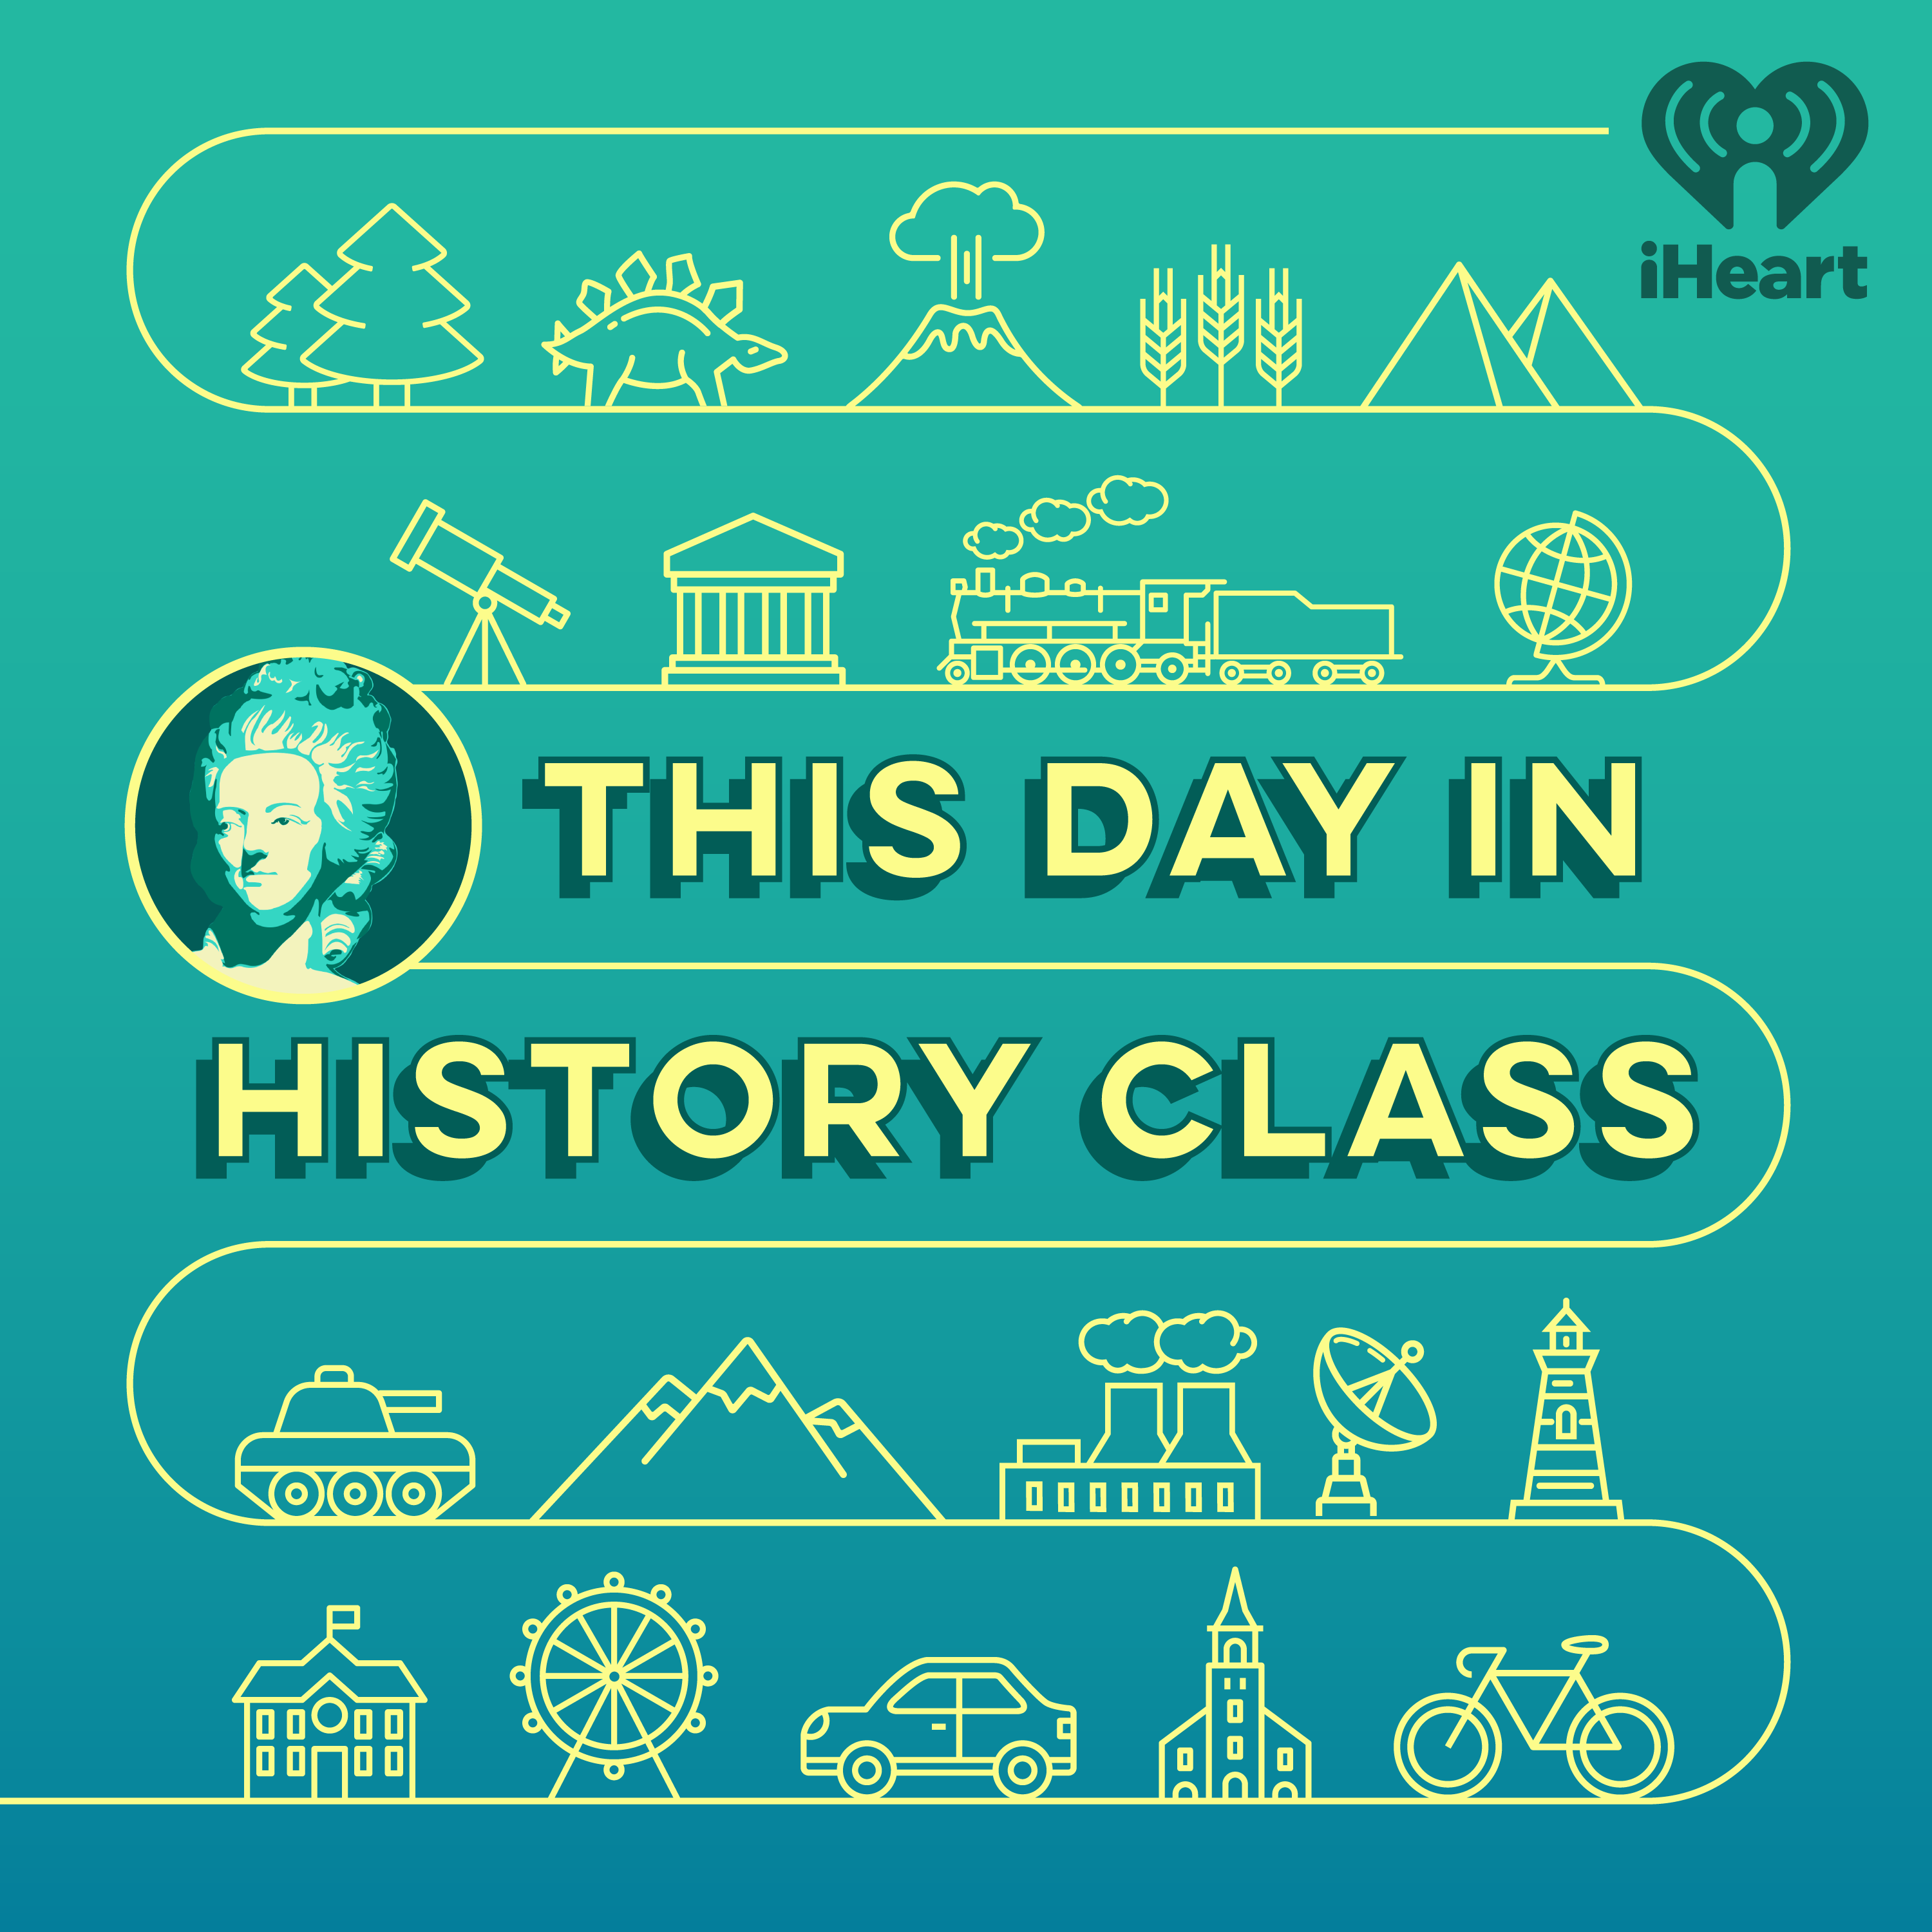 This Day In History Class - December 2nd